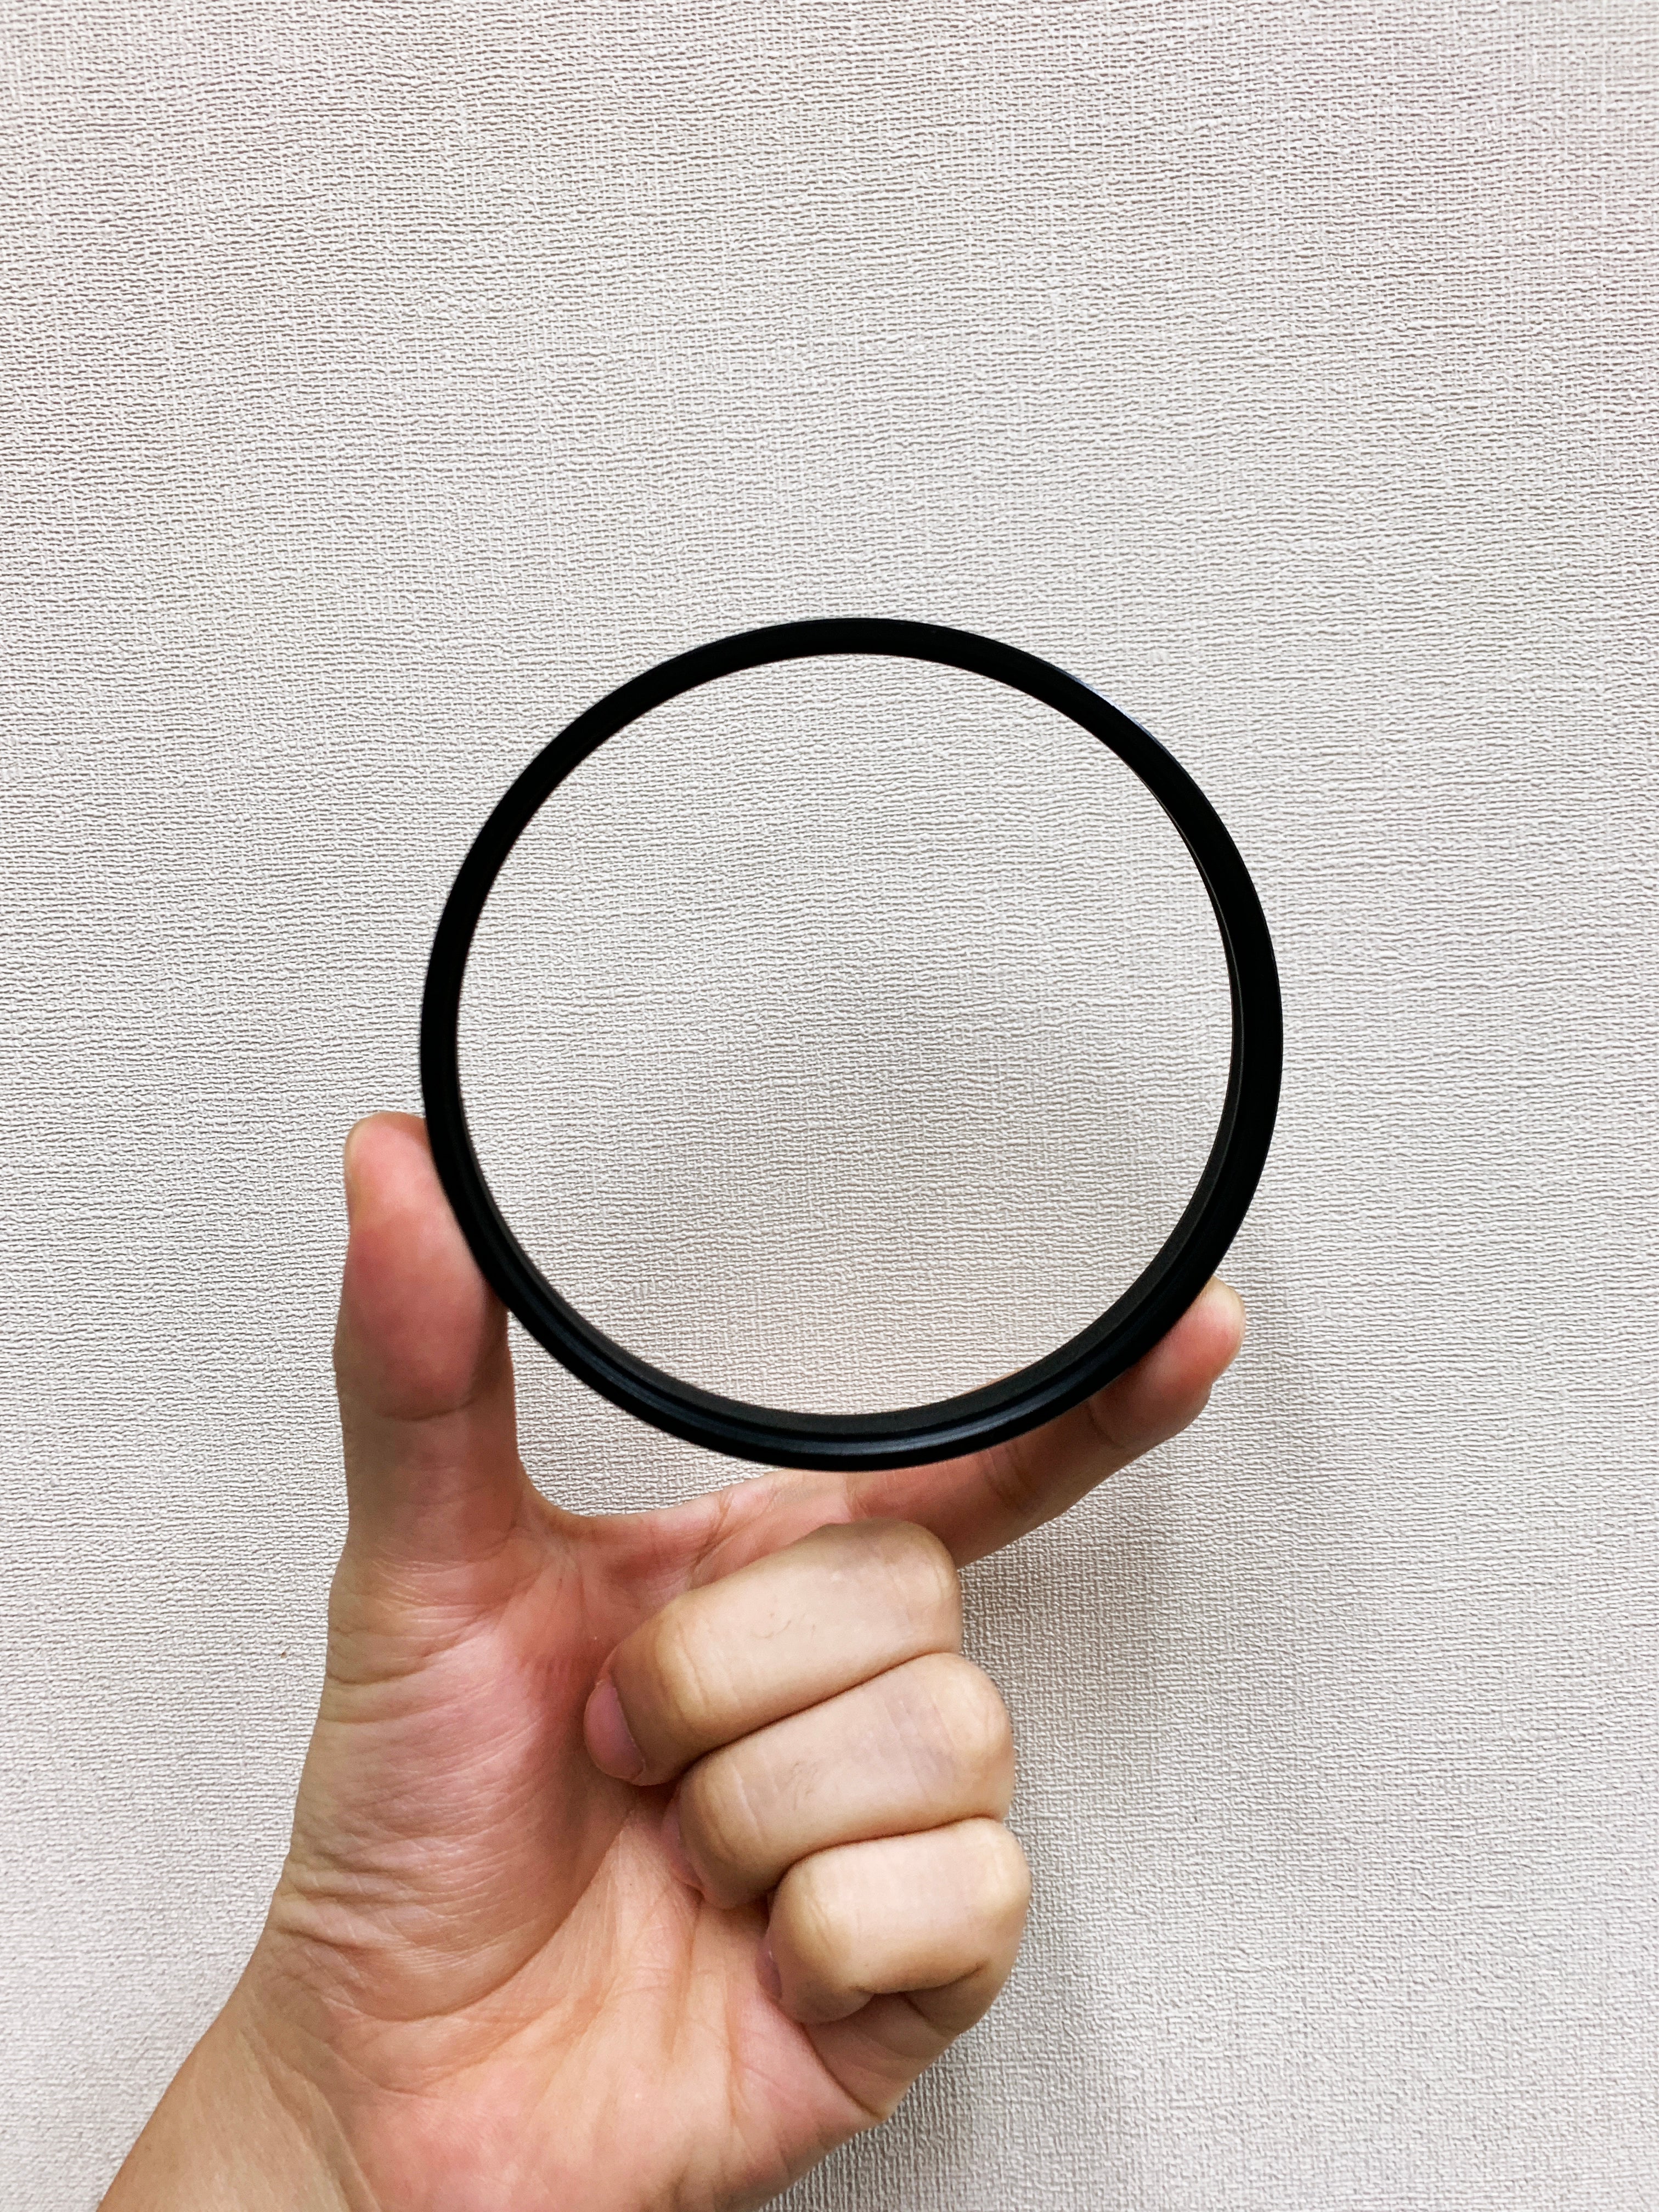 Hand holding a Vazen Step-up Ring for 95mm Screw-in Filters for Vazen 40mm Lens